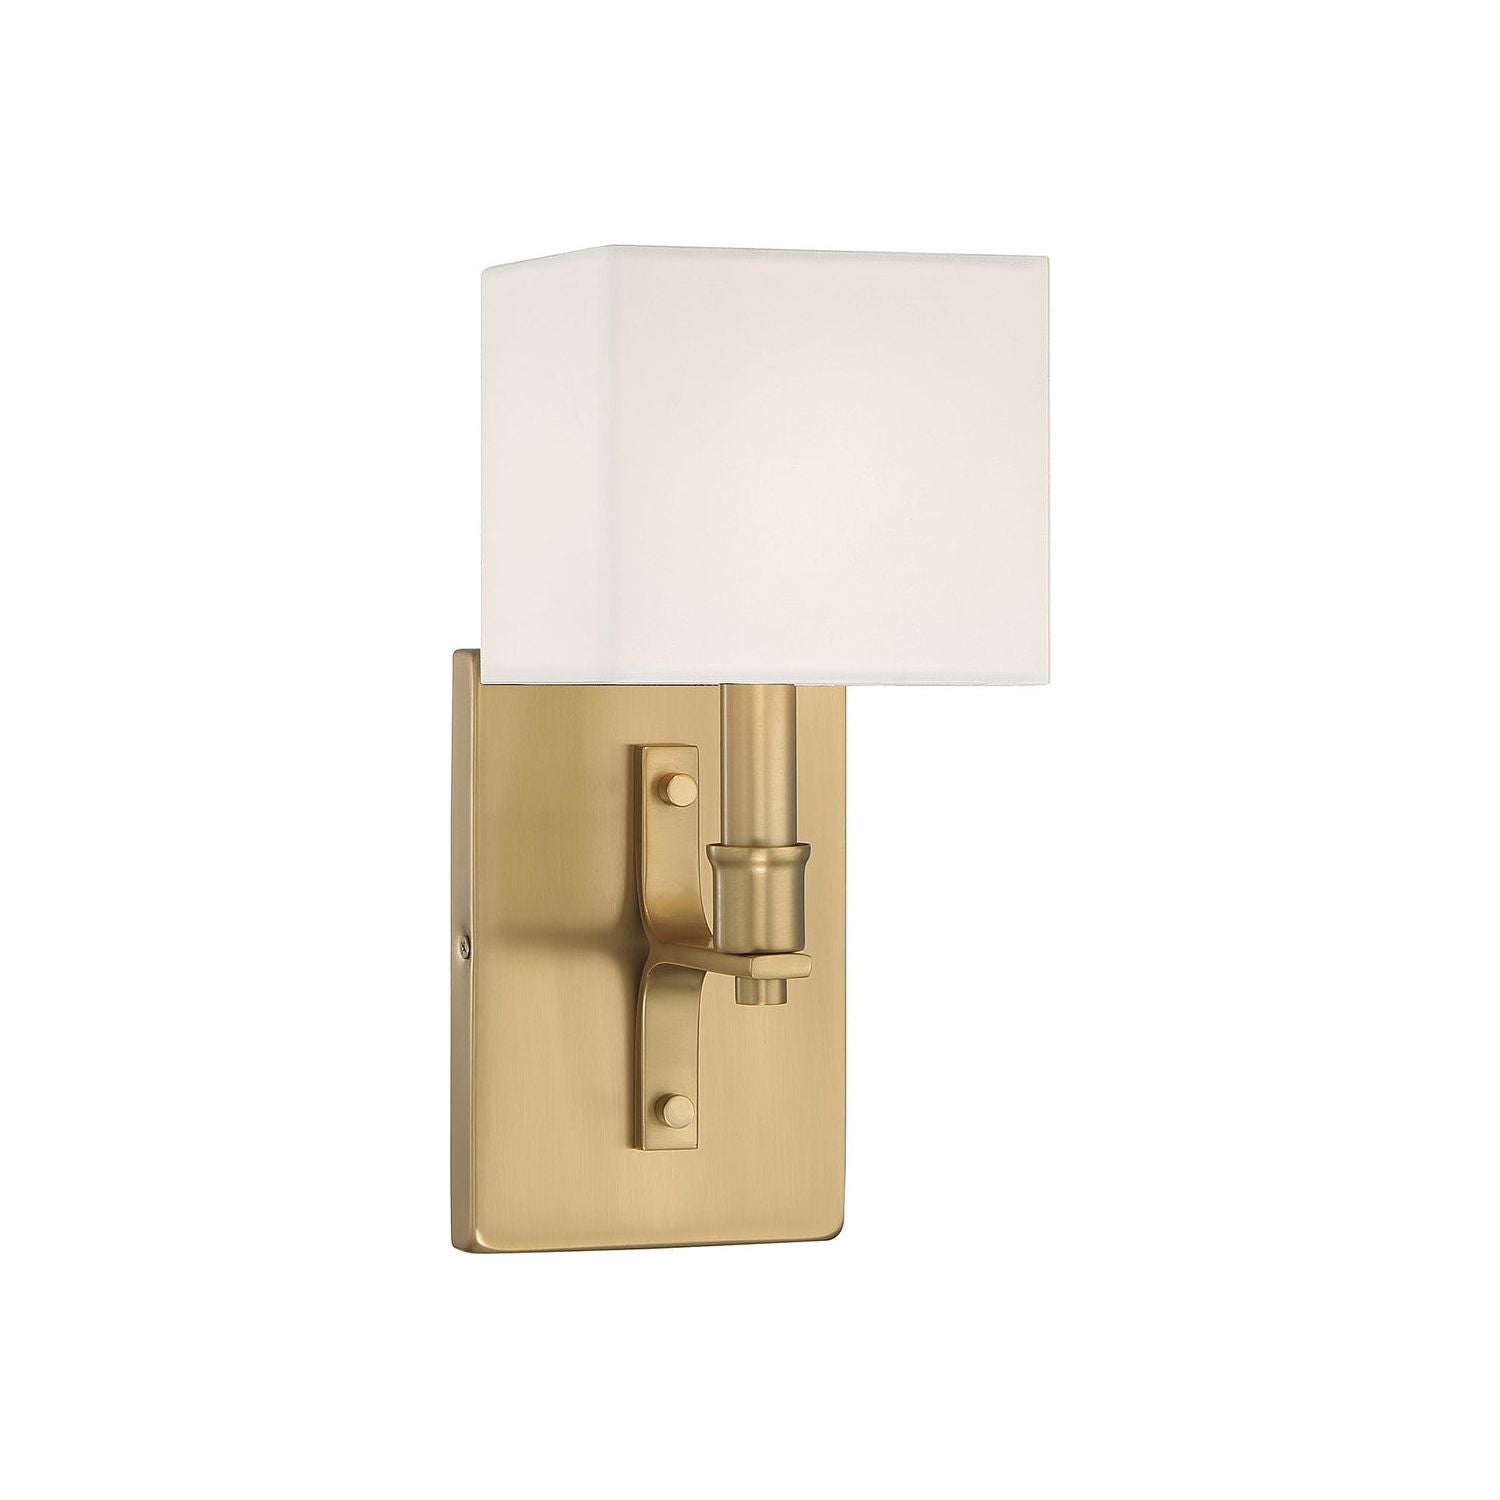 Lighting One E - V6-L9-8550-1-322 - One Light Wall Sconce - Collins - Warm Brass